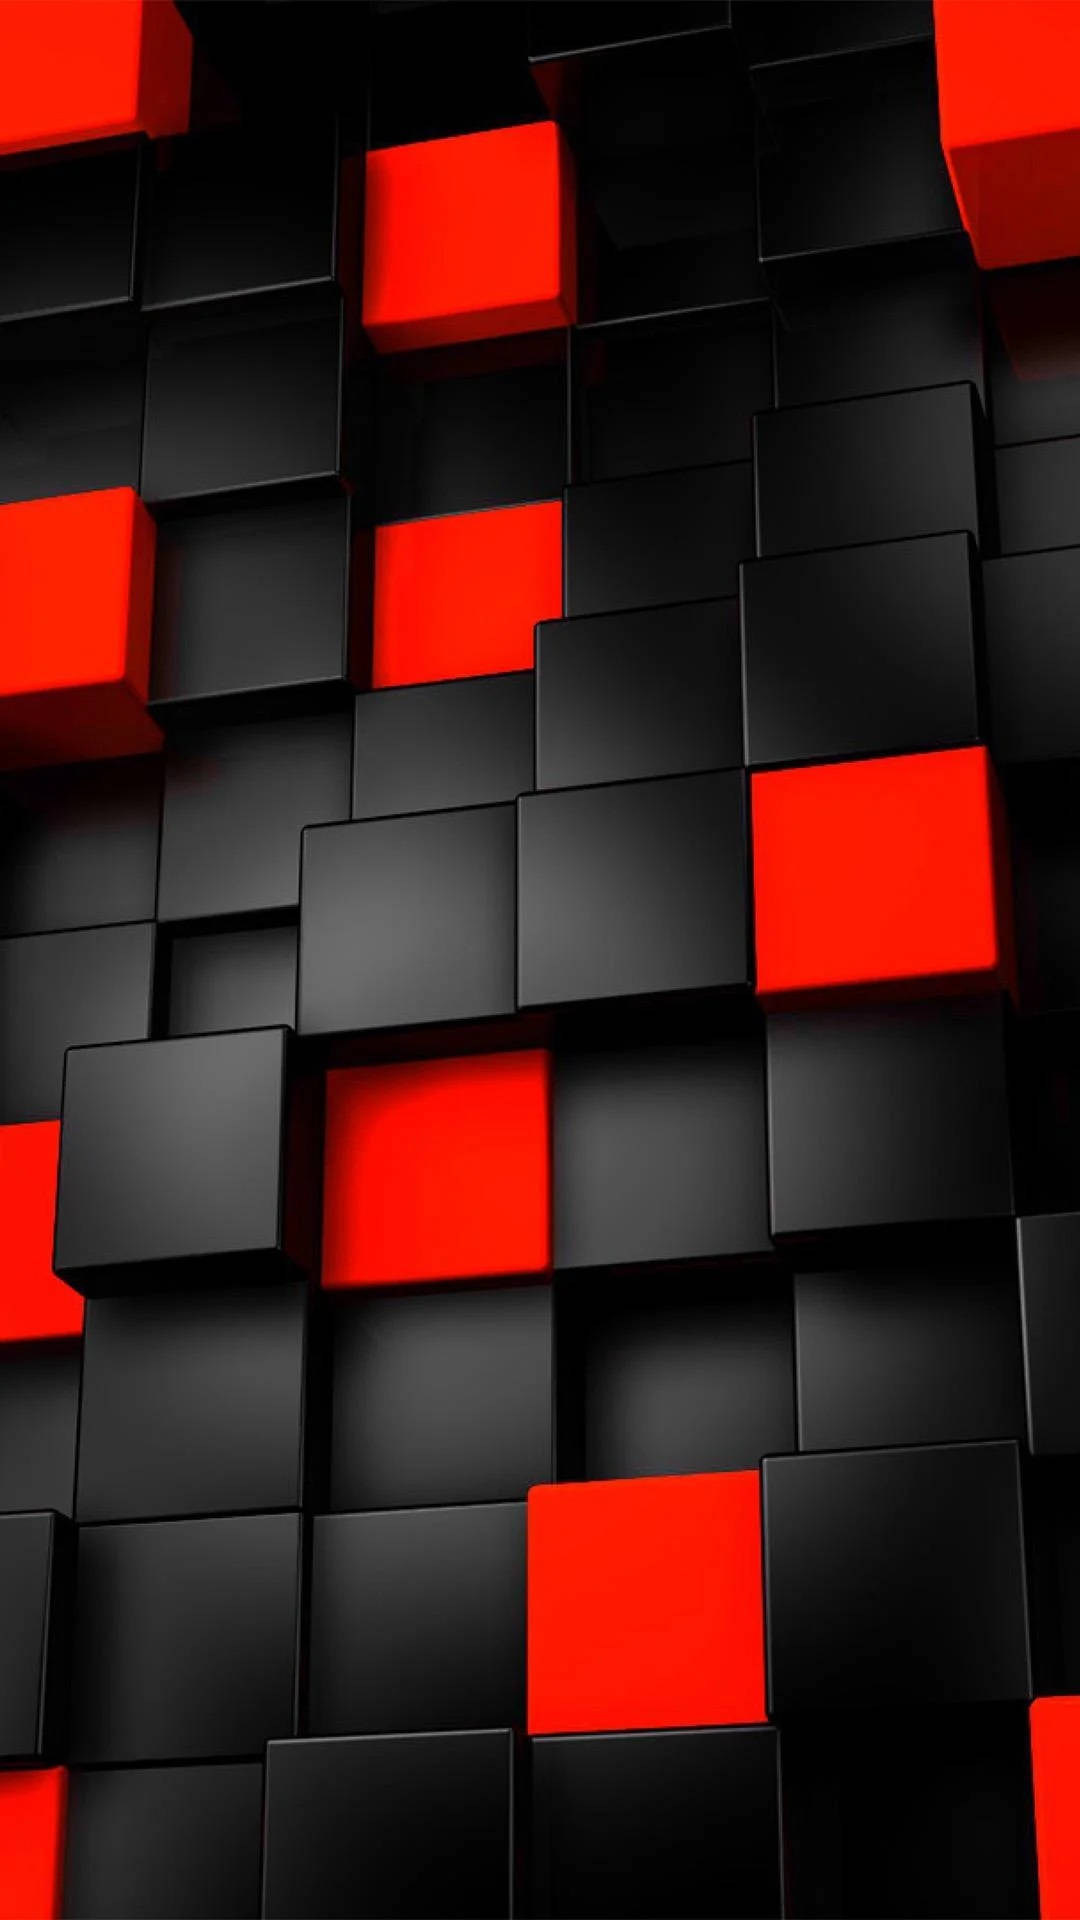 Cube Patterned Black And Red Iphone Wallpaper